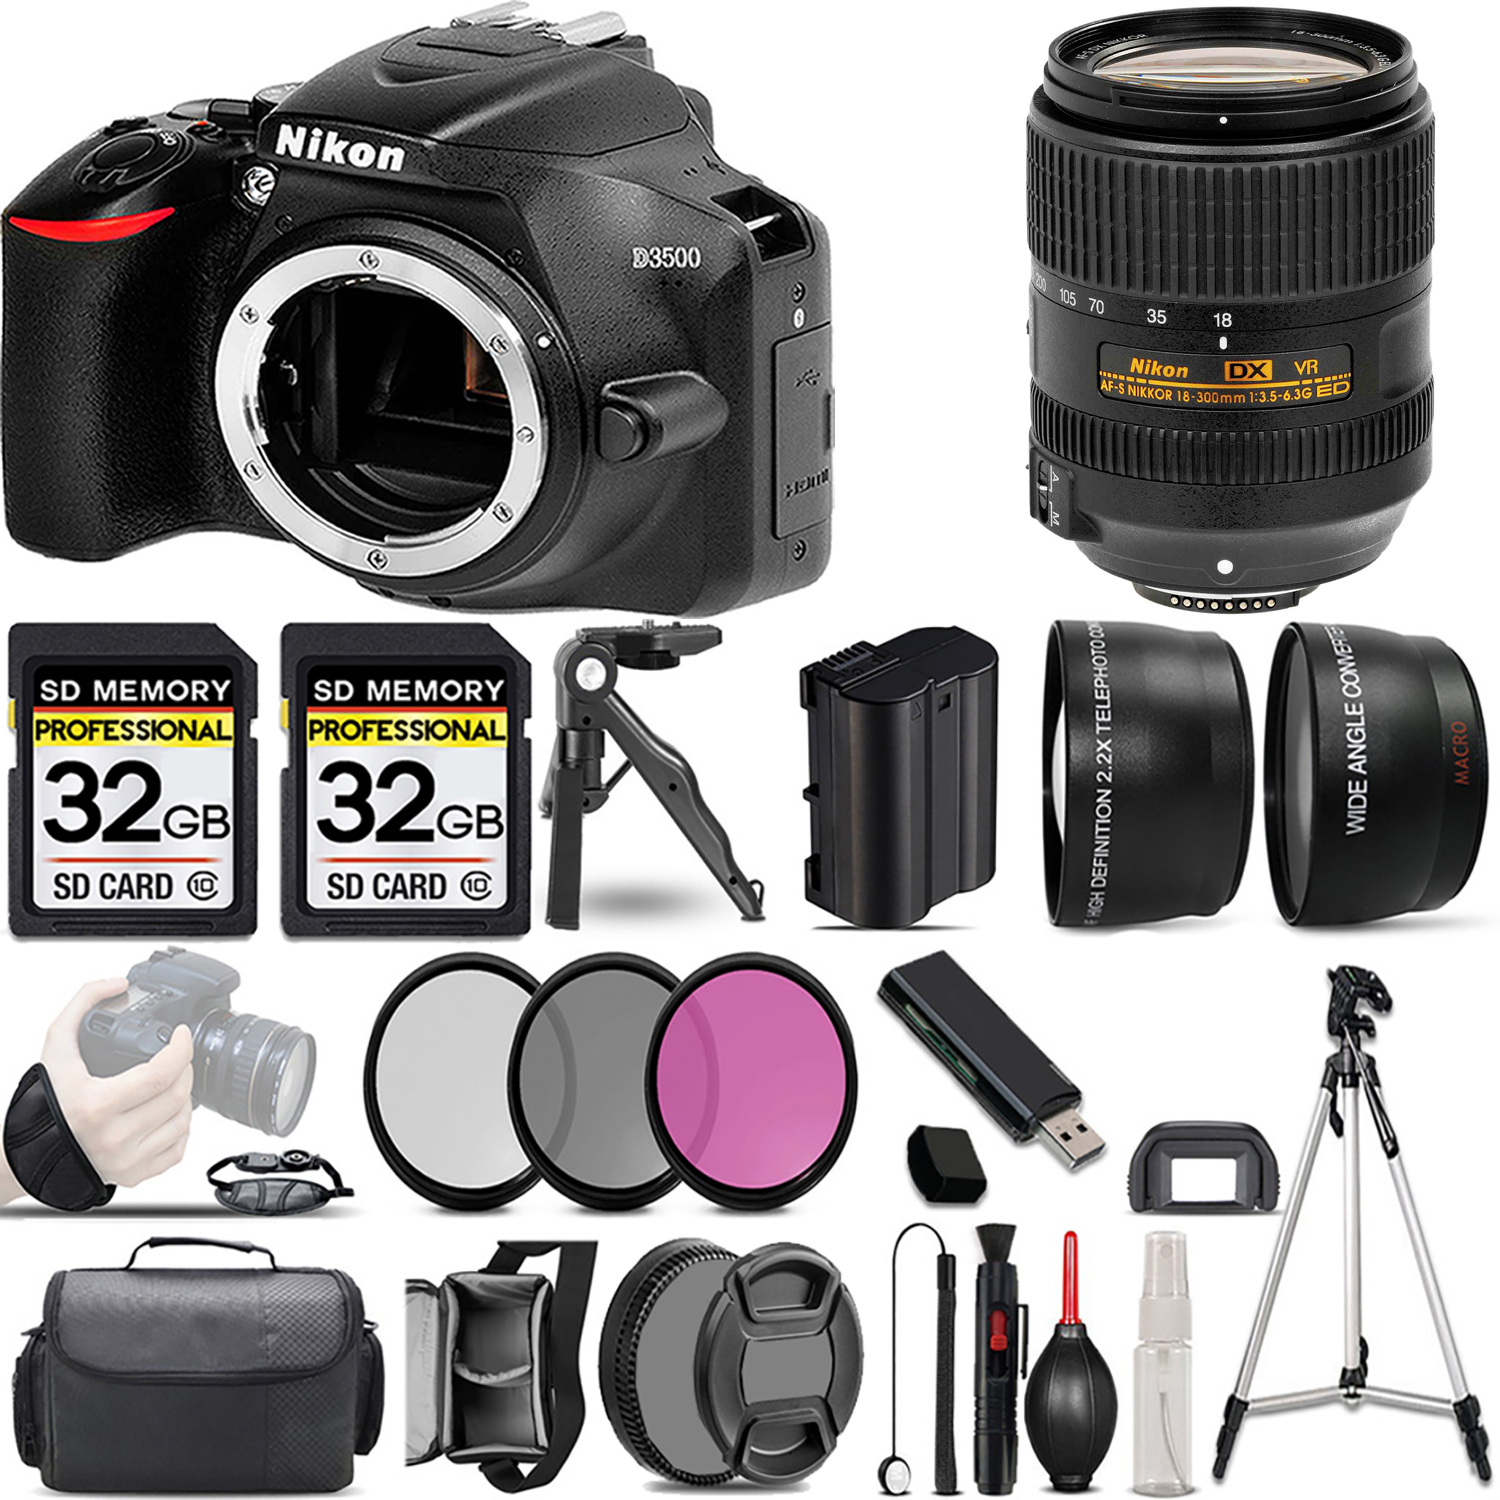 D3500 DSLR Camera (Body Only) + 18- 300mm Lens + 3 Piece Filter Set + 64GB *FREE SHIPPING*